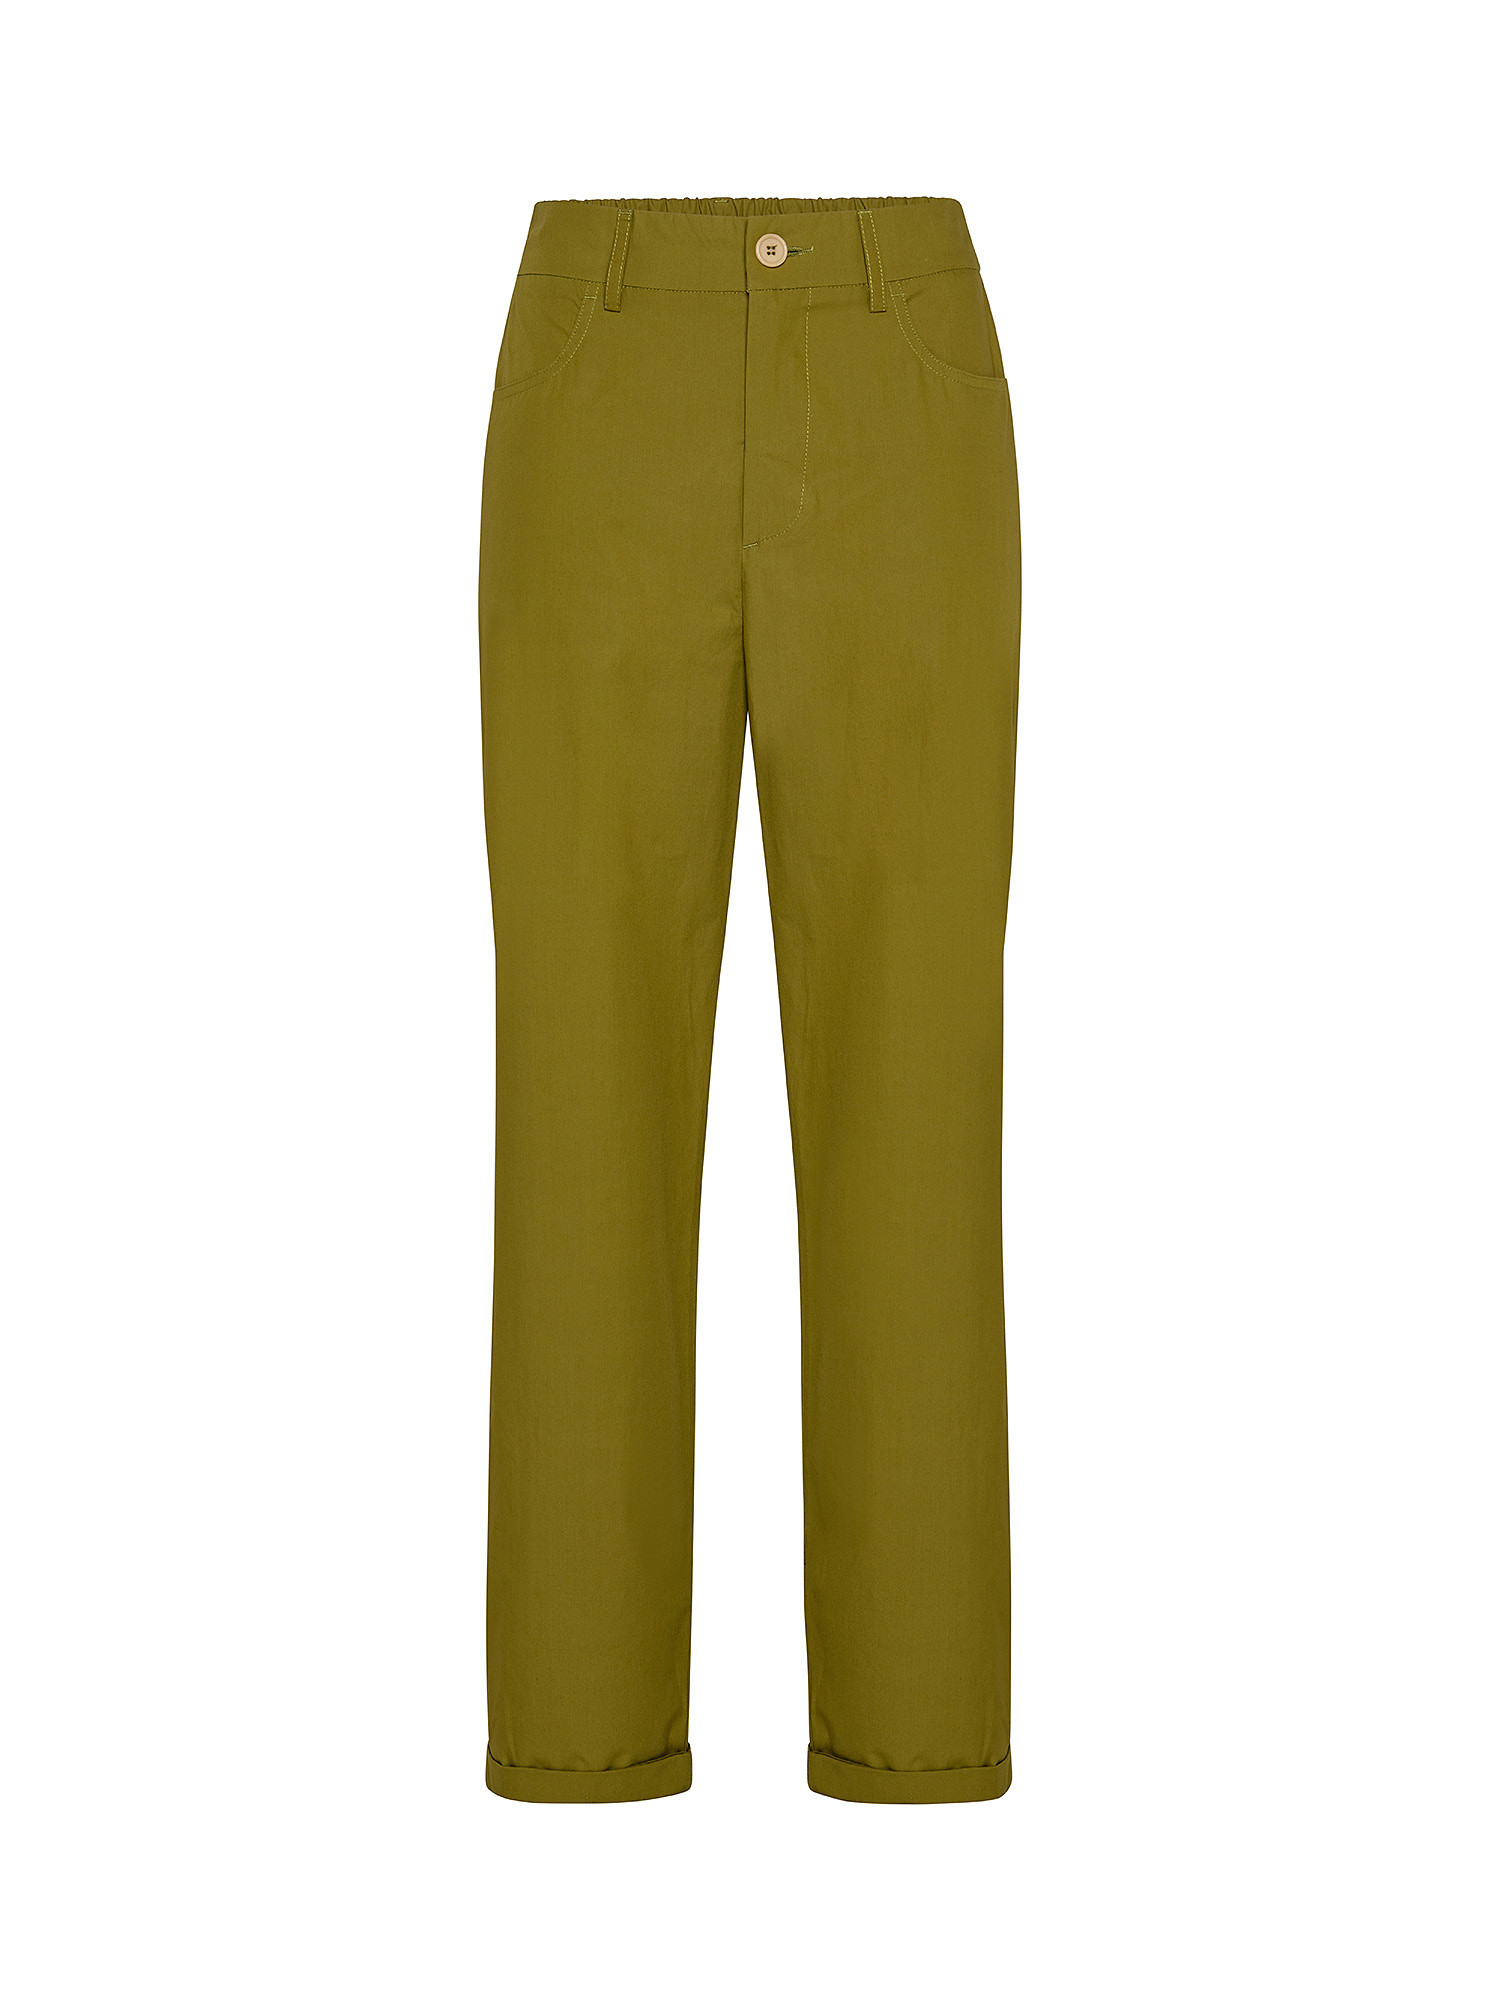 Delaware trousers in cotton poplin, Green, large image number 0